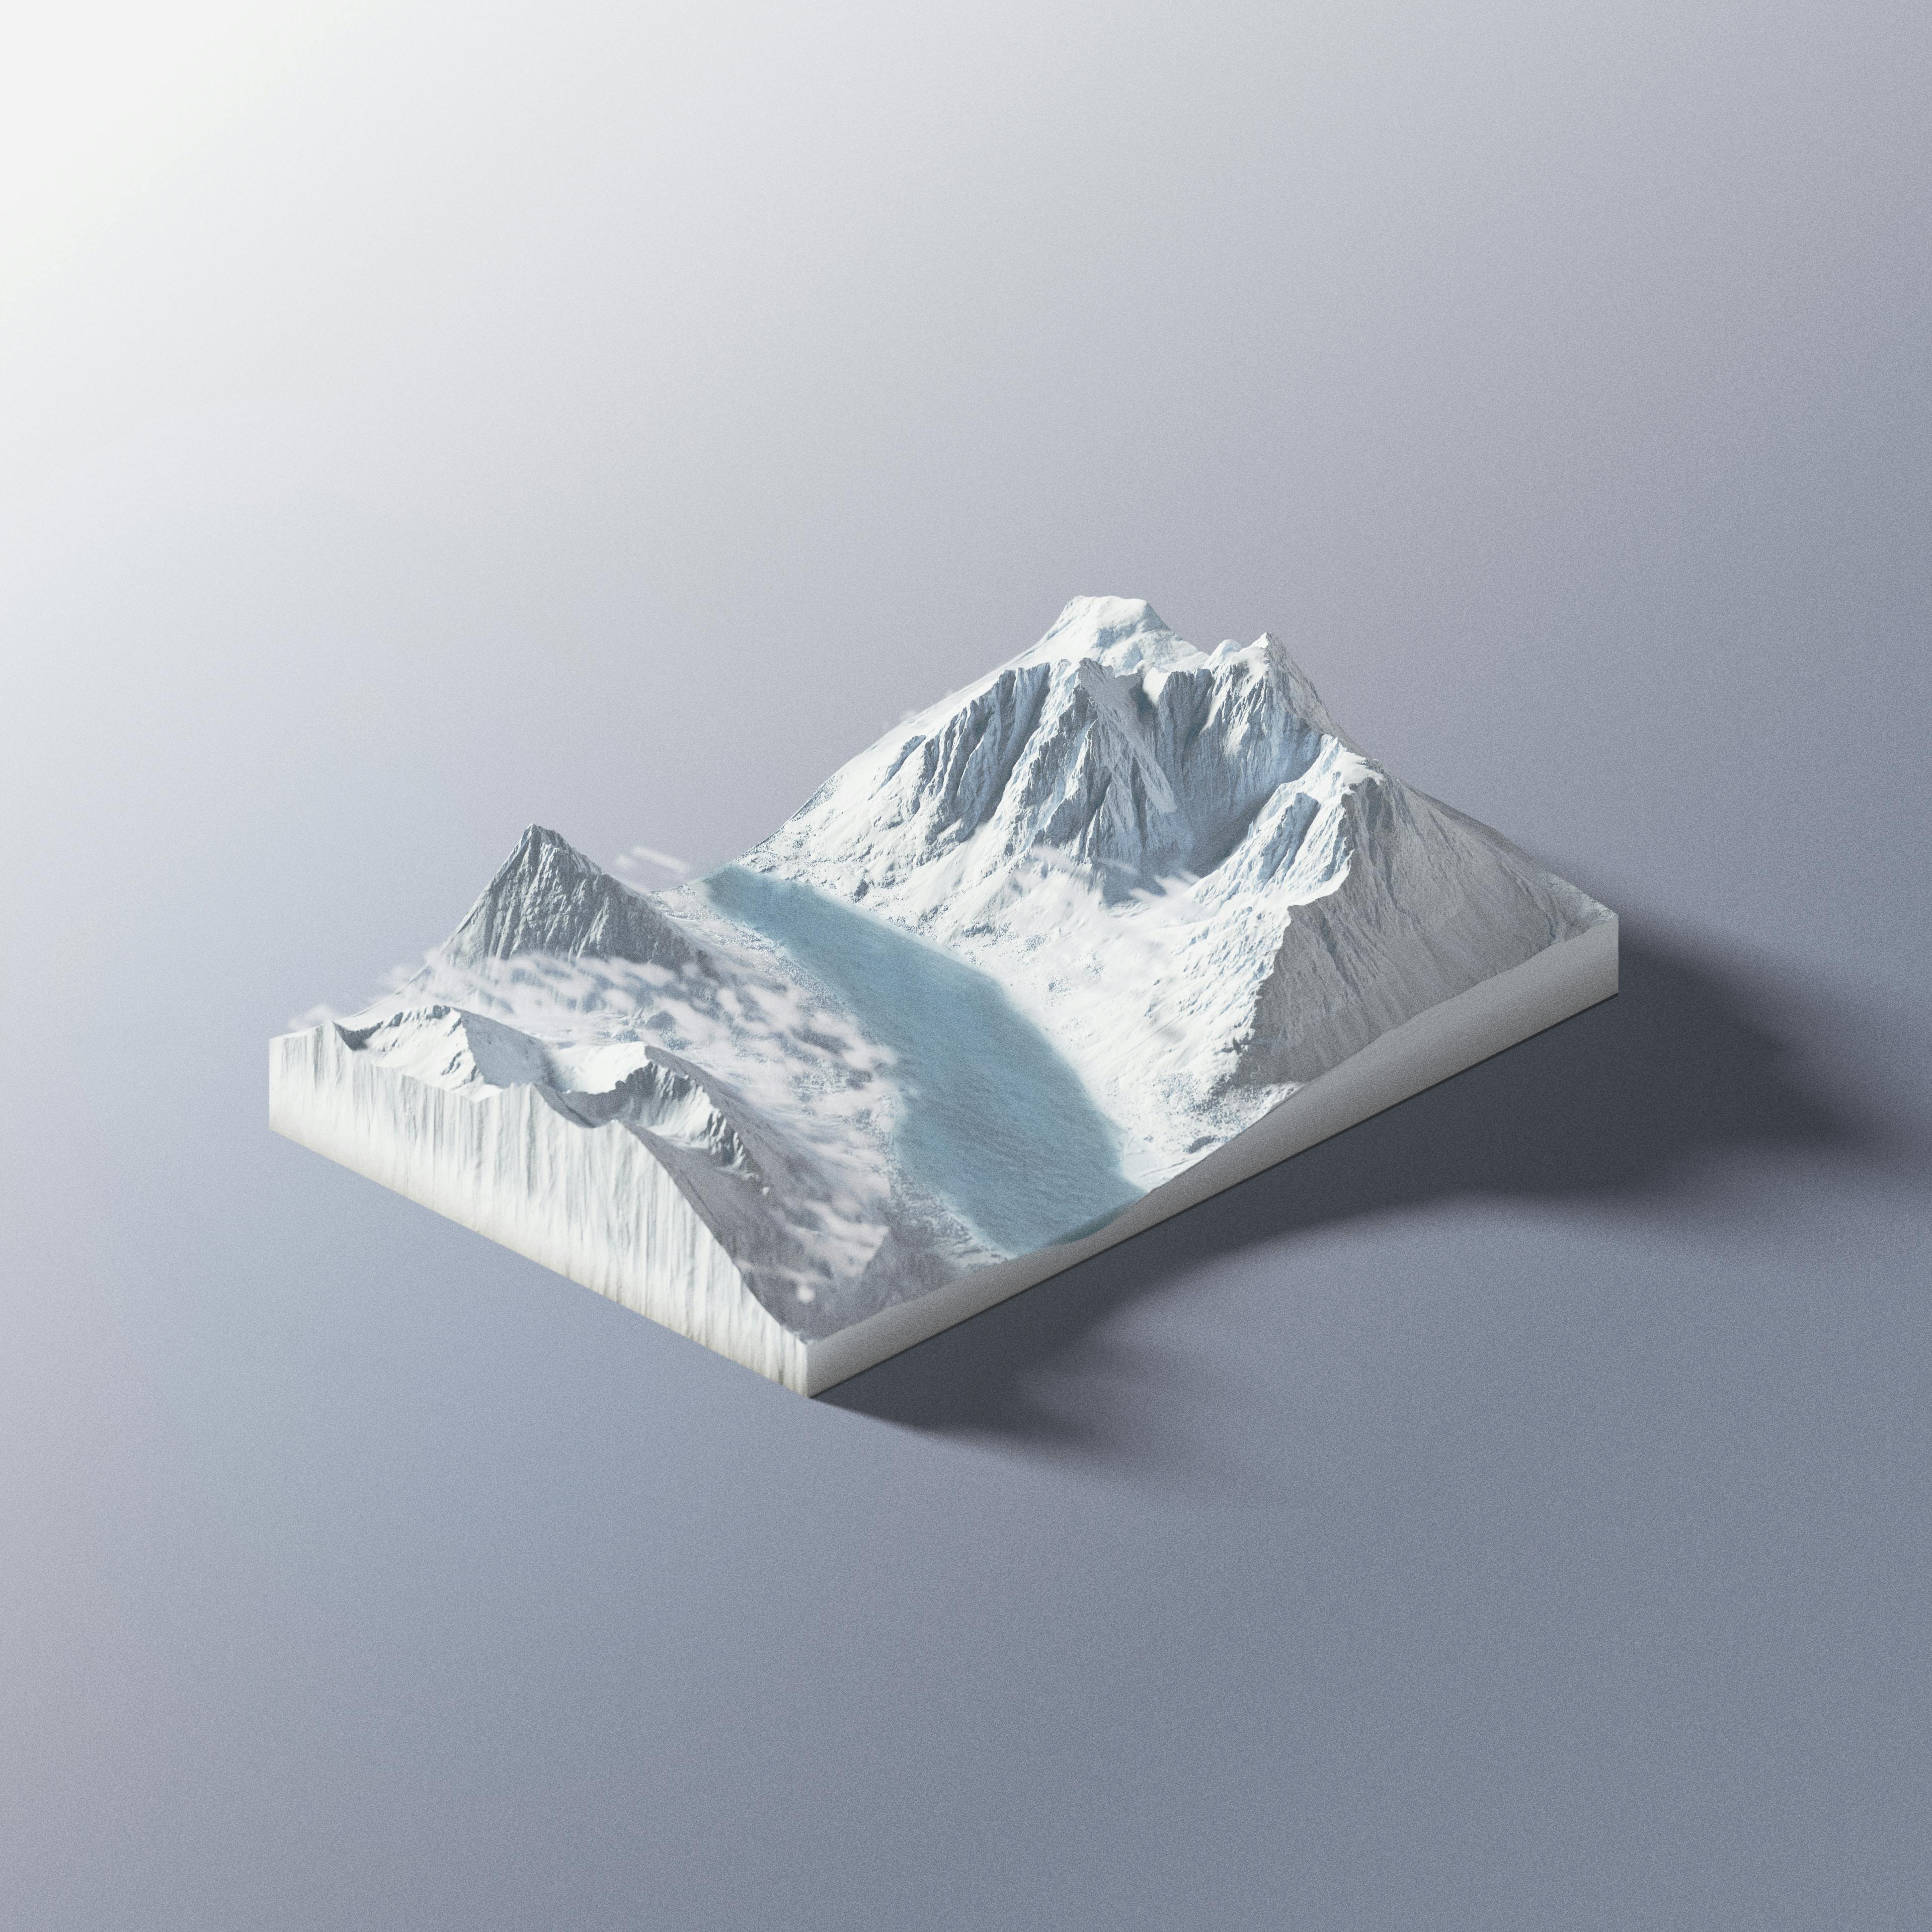 A 3D rendered image of a mountain